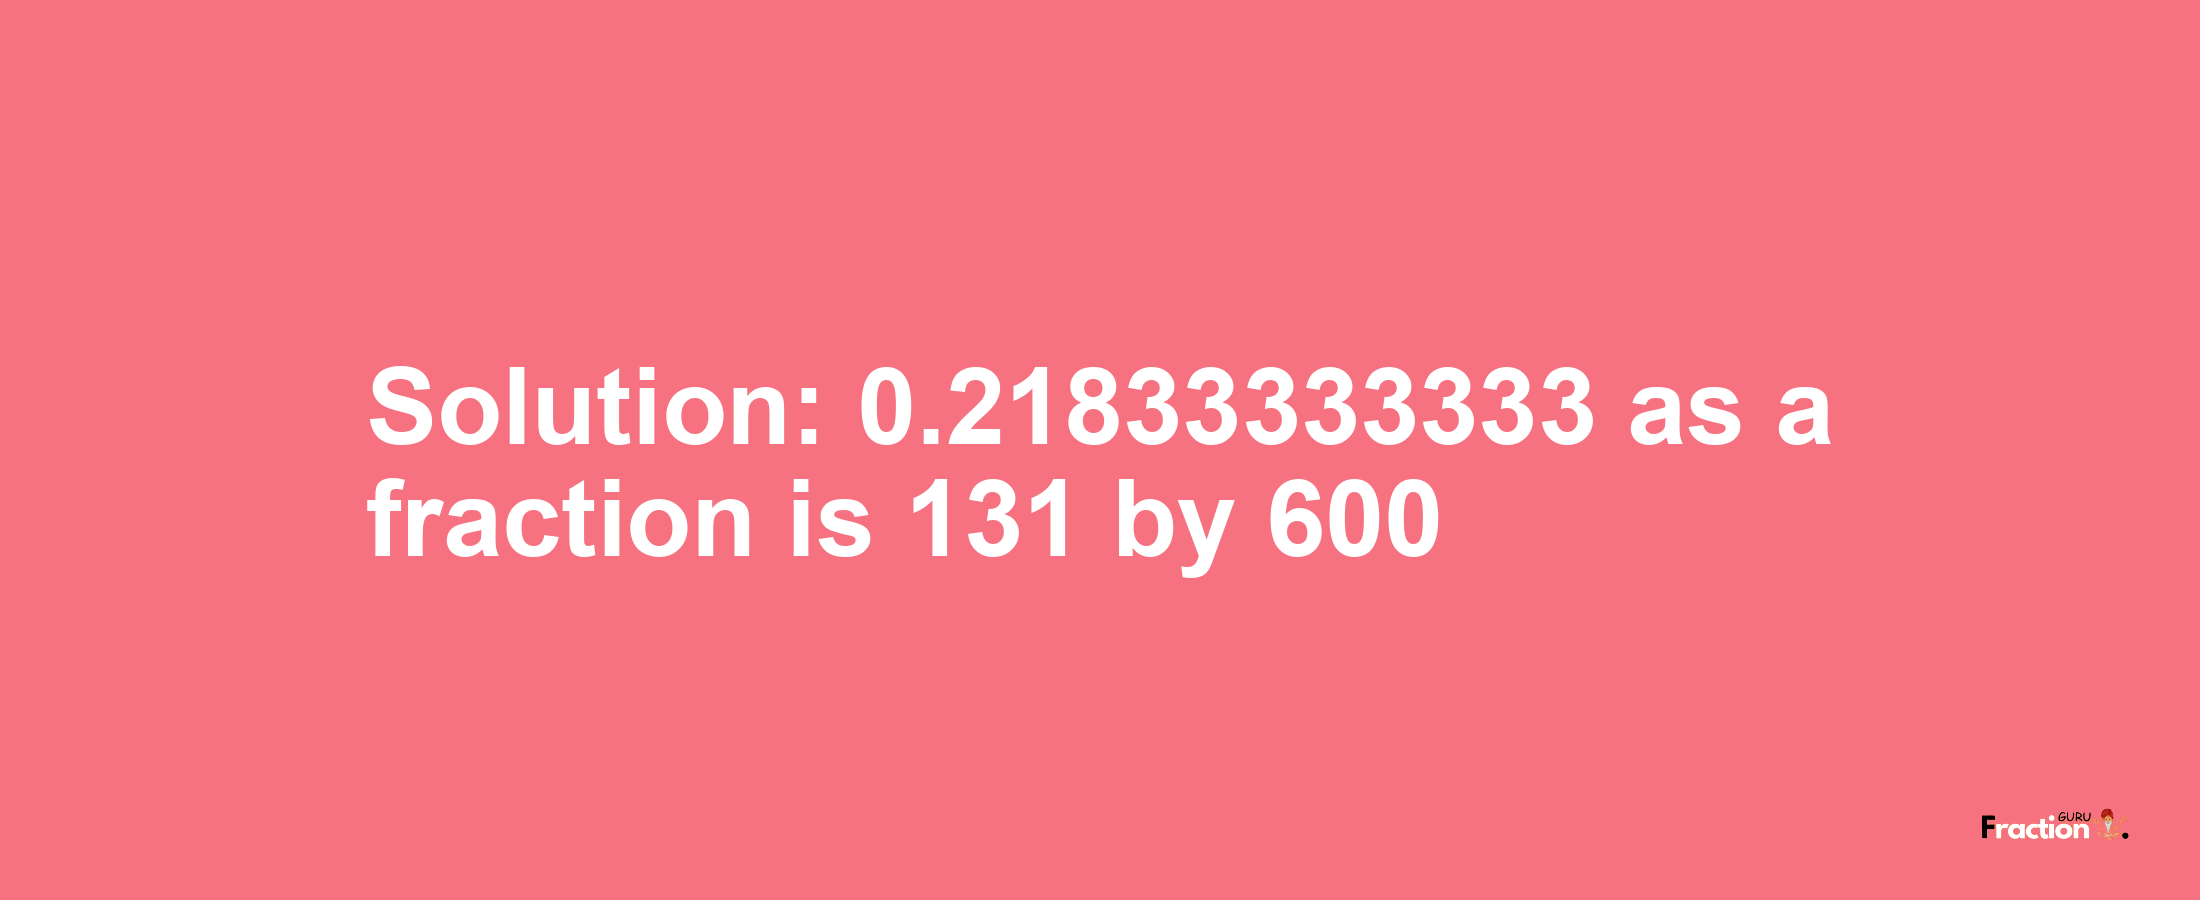 Solution:0.21833333333 as a fraction is 131/600